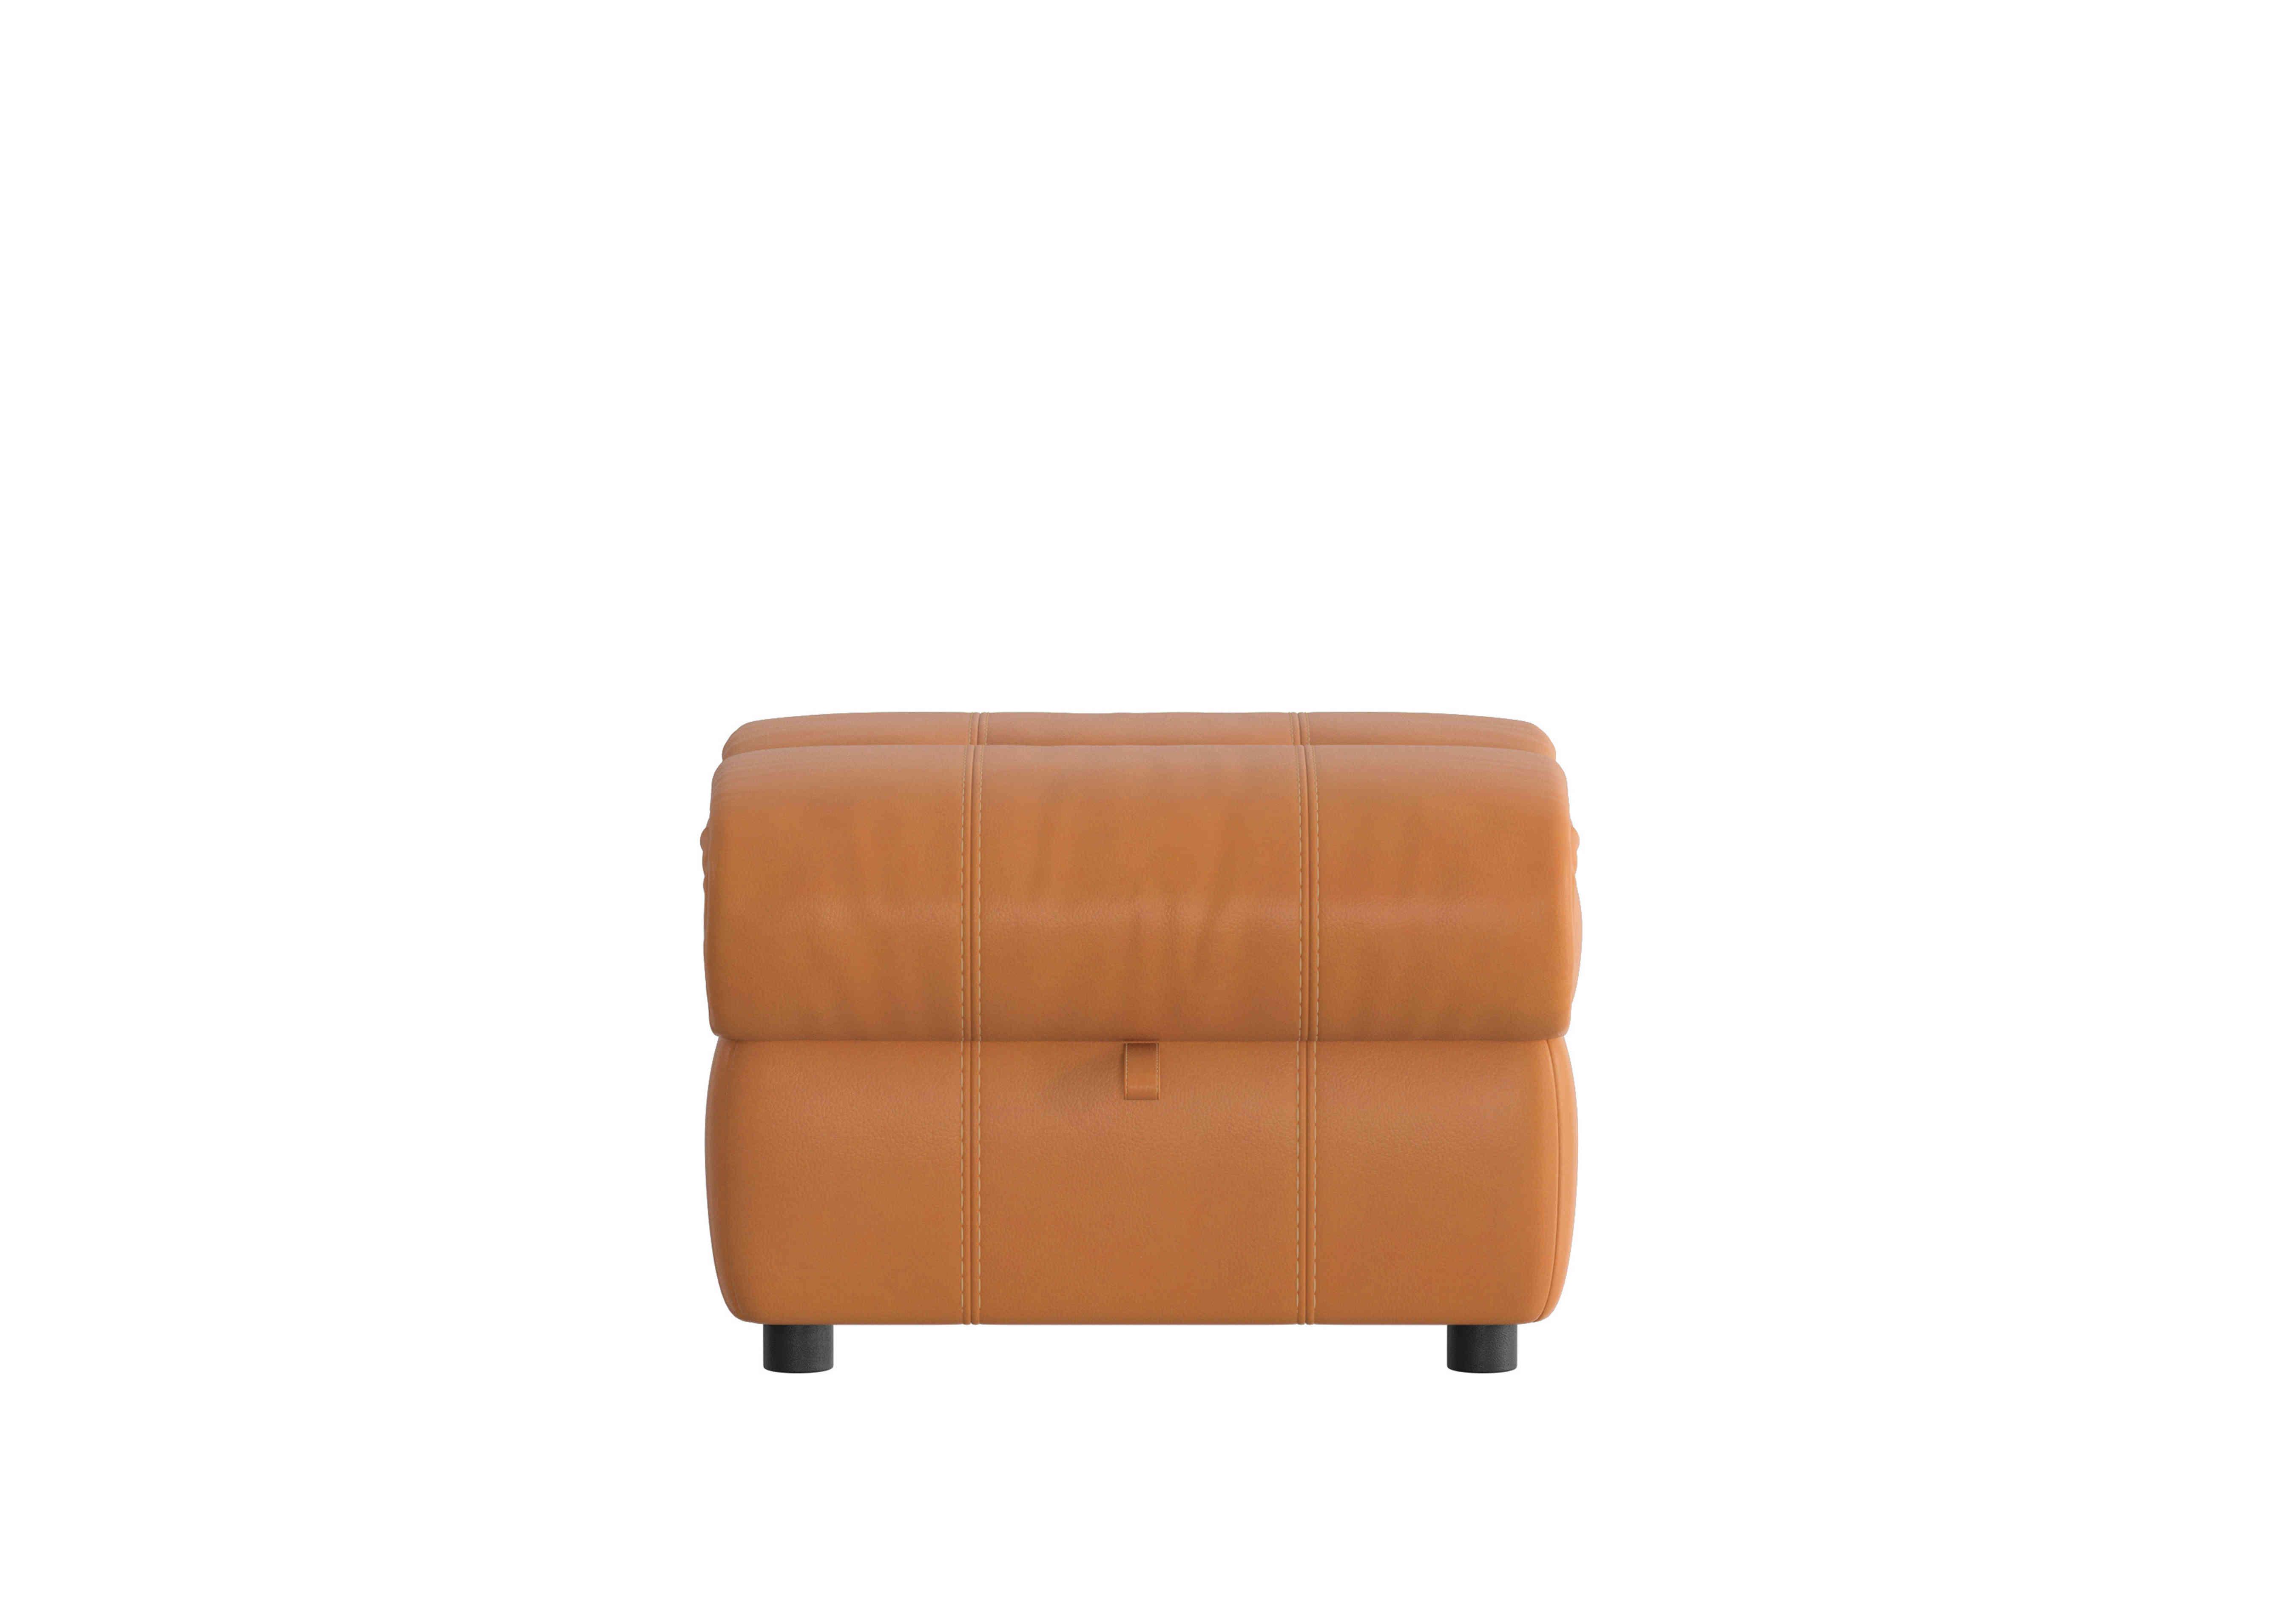 Link Leather Footstool in Nc-335e Honey Yellow on Furniture Village